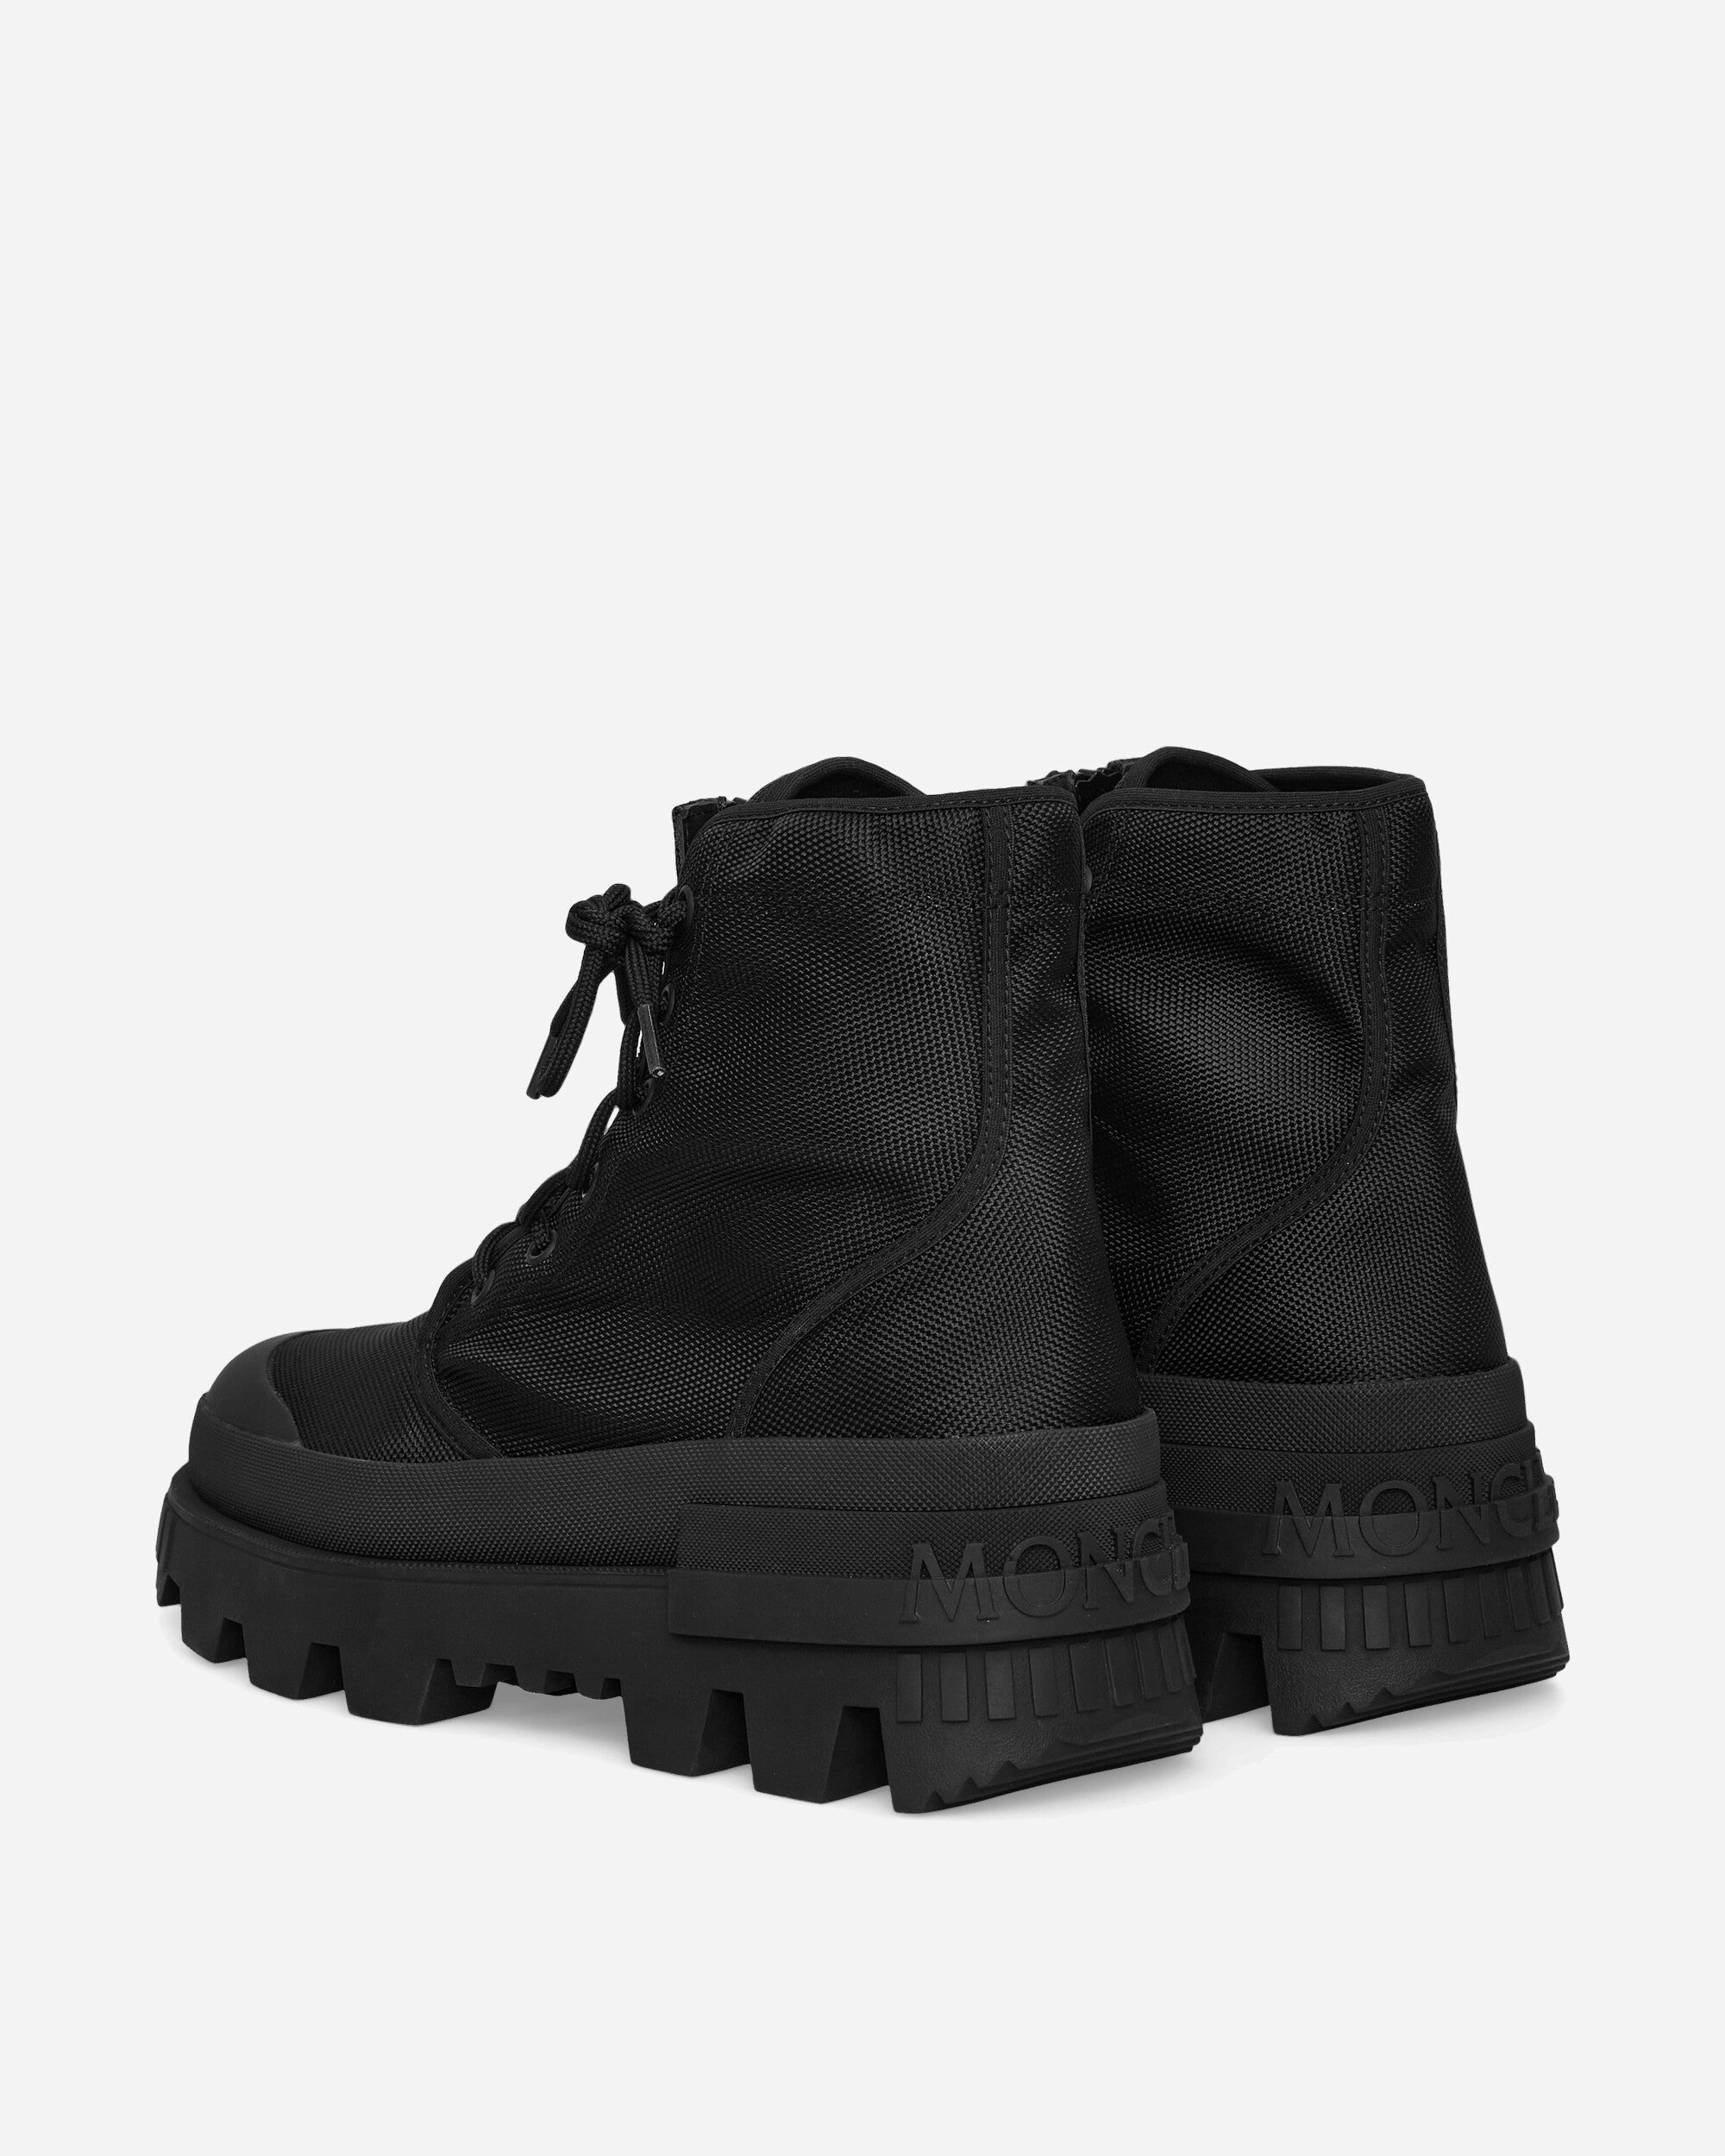 Moncler Genius 4 Moncler Hyke Hyke Desertyx Ankle Boots Black Boots Hiking 4F00010M2541 999